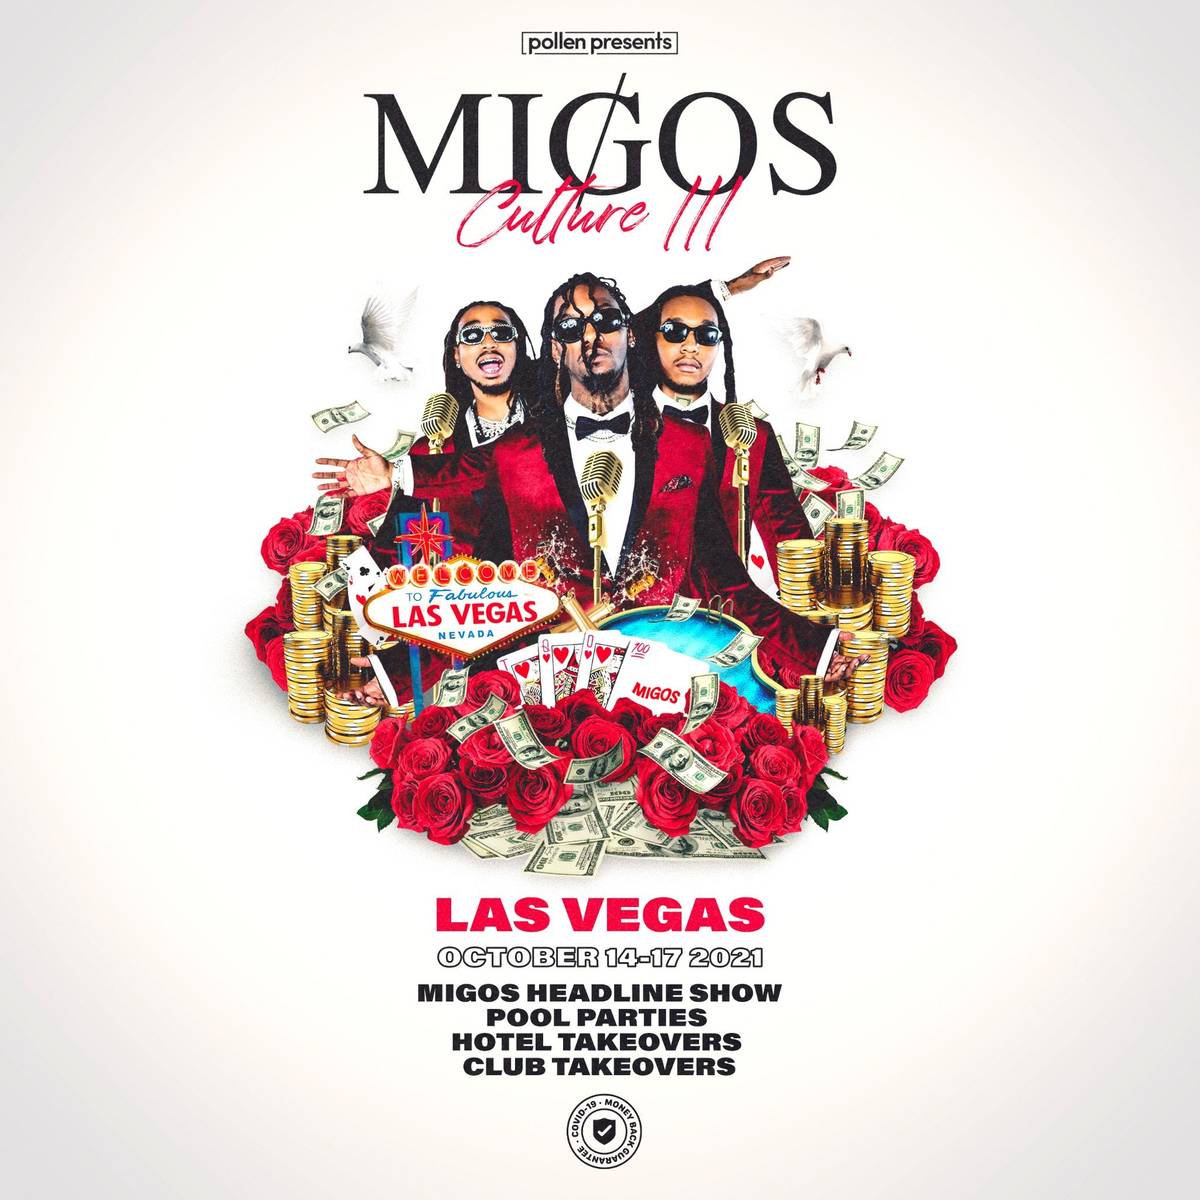 Rap stars Migos will perform their new album "Culture III" live in Vegas for the first time thi ...